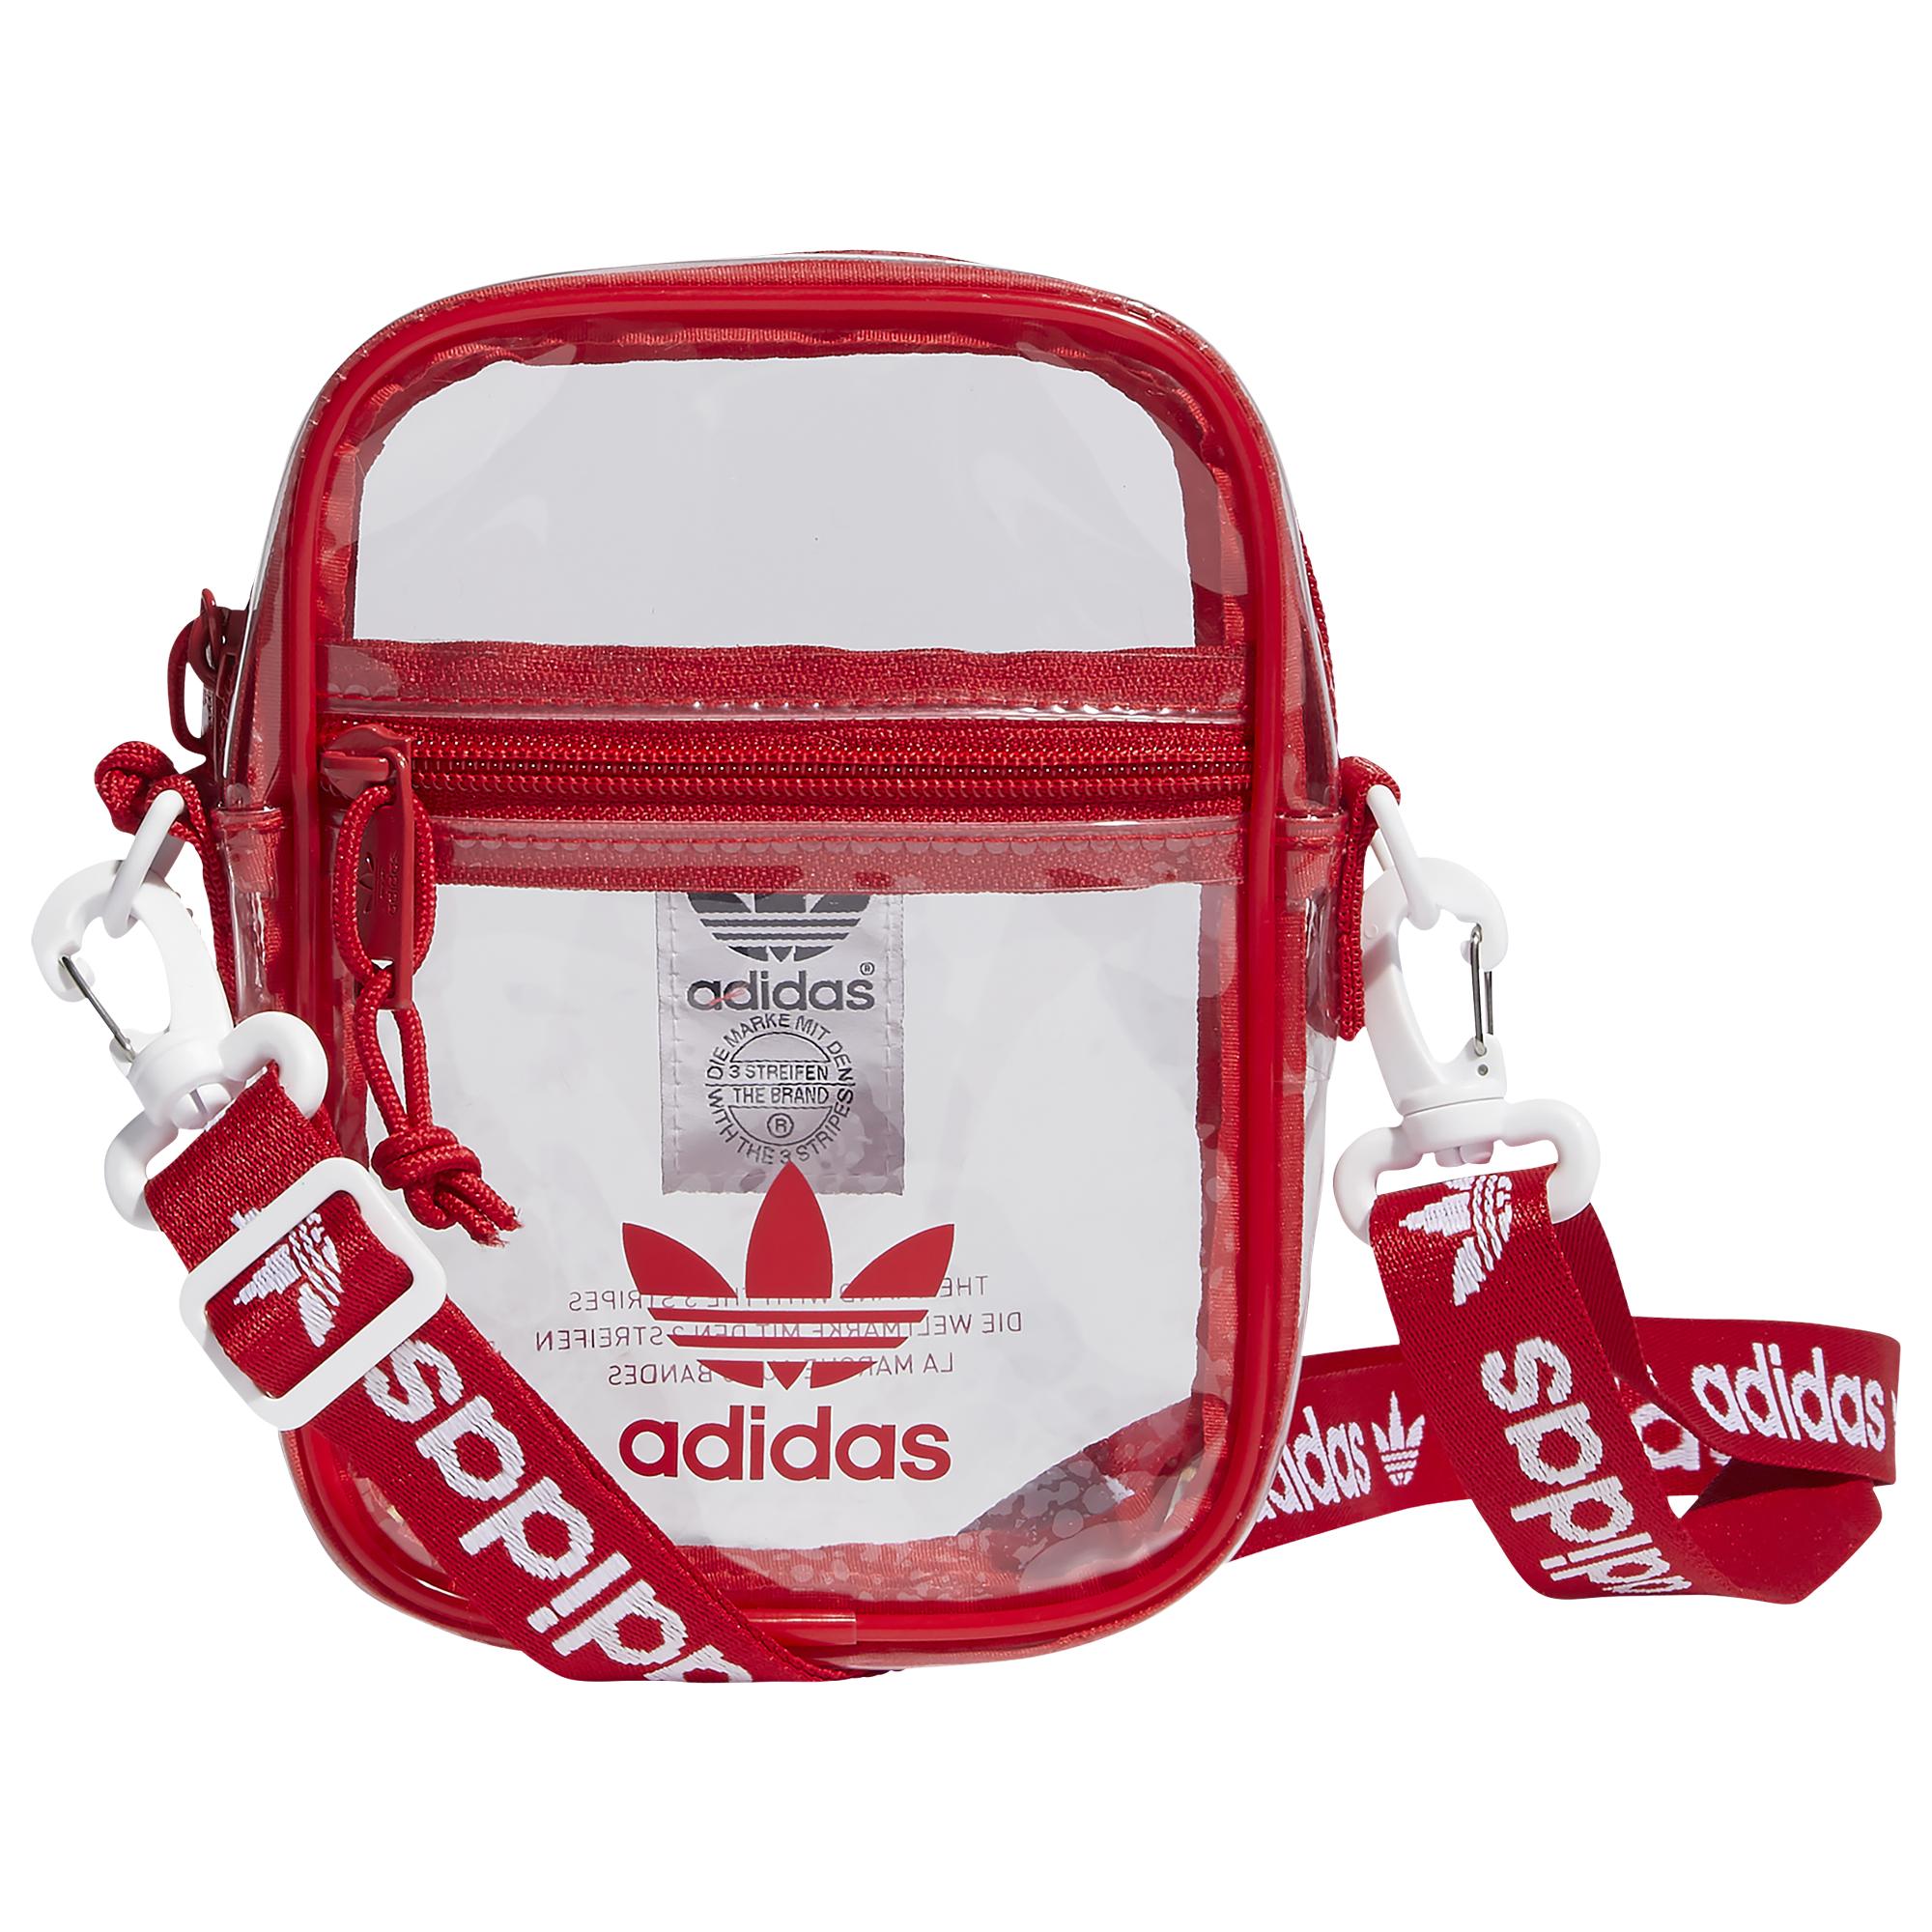 Adidas Crossbody Bag Outlet, SAVE 55% - aveclumiere.com